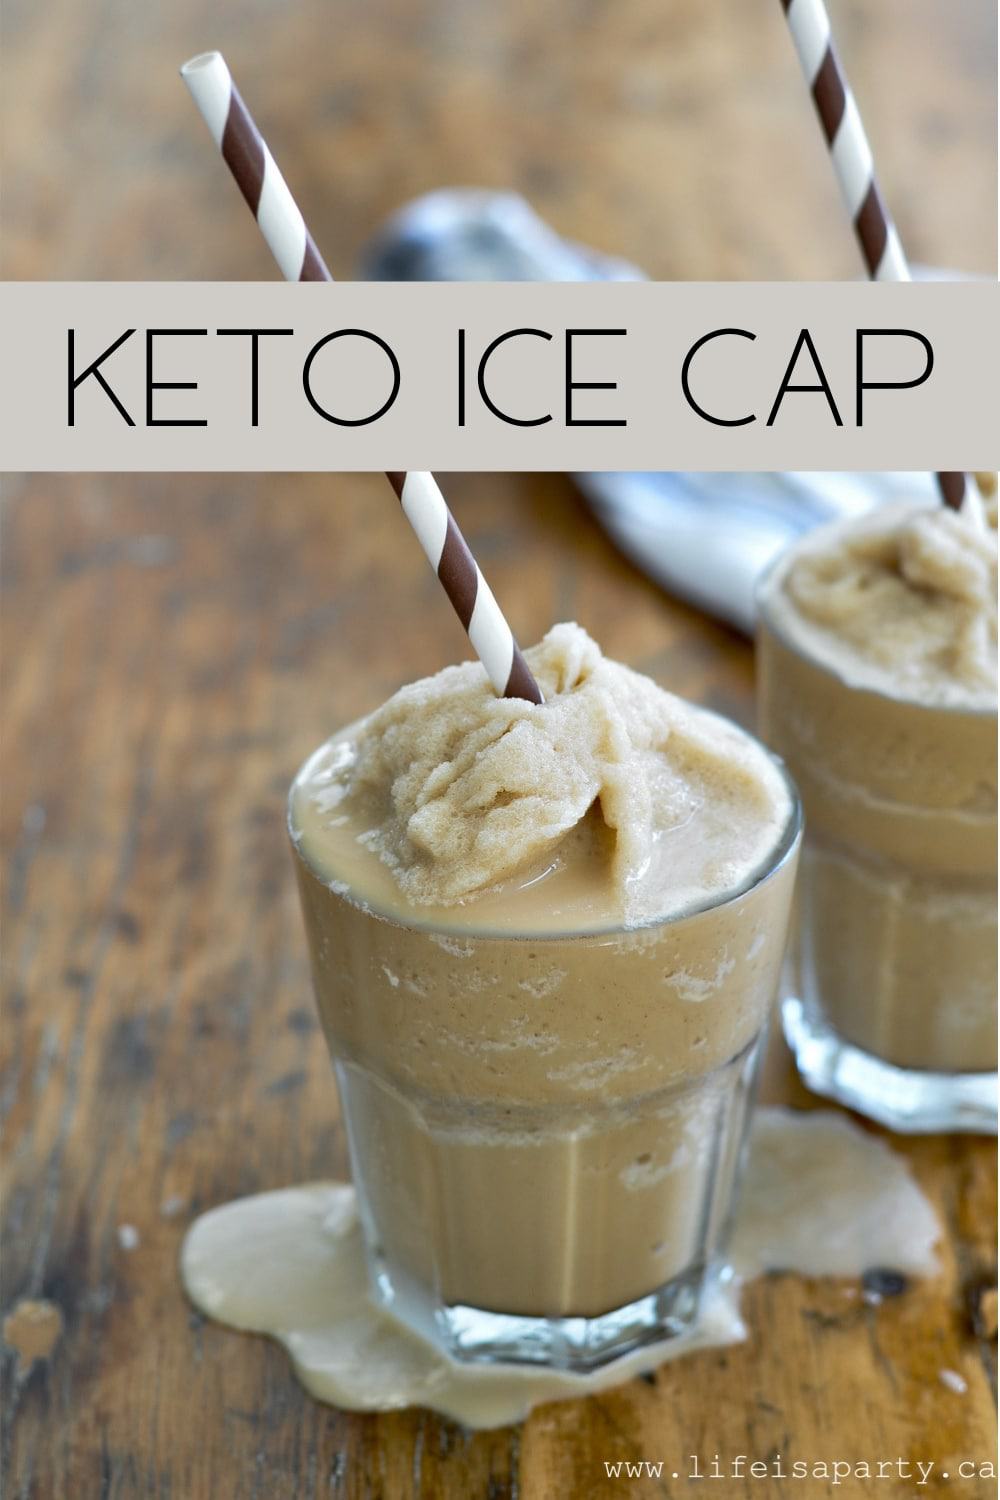 keto ice cappuccino with a stripped straw.